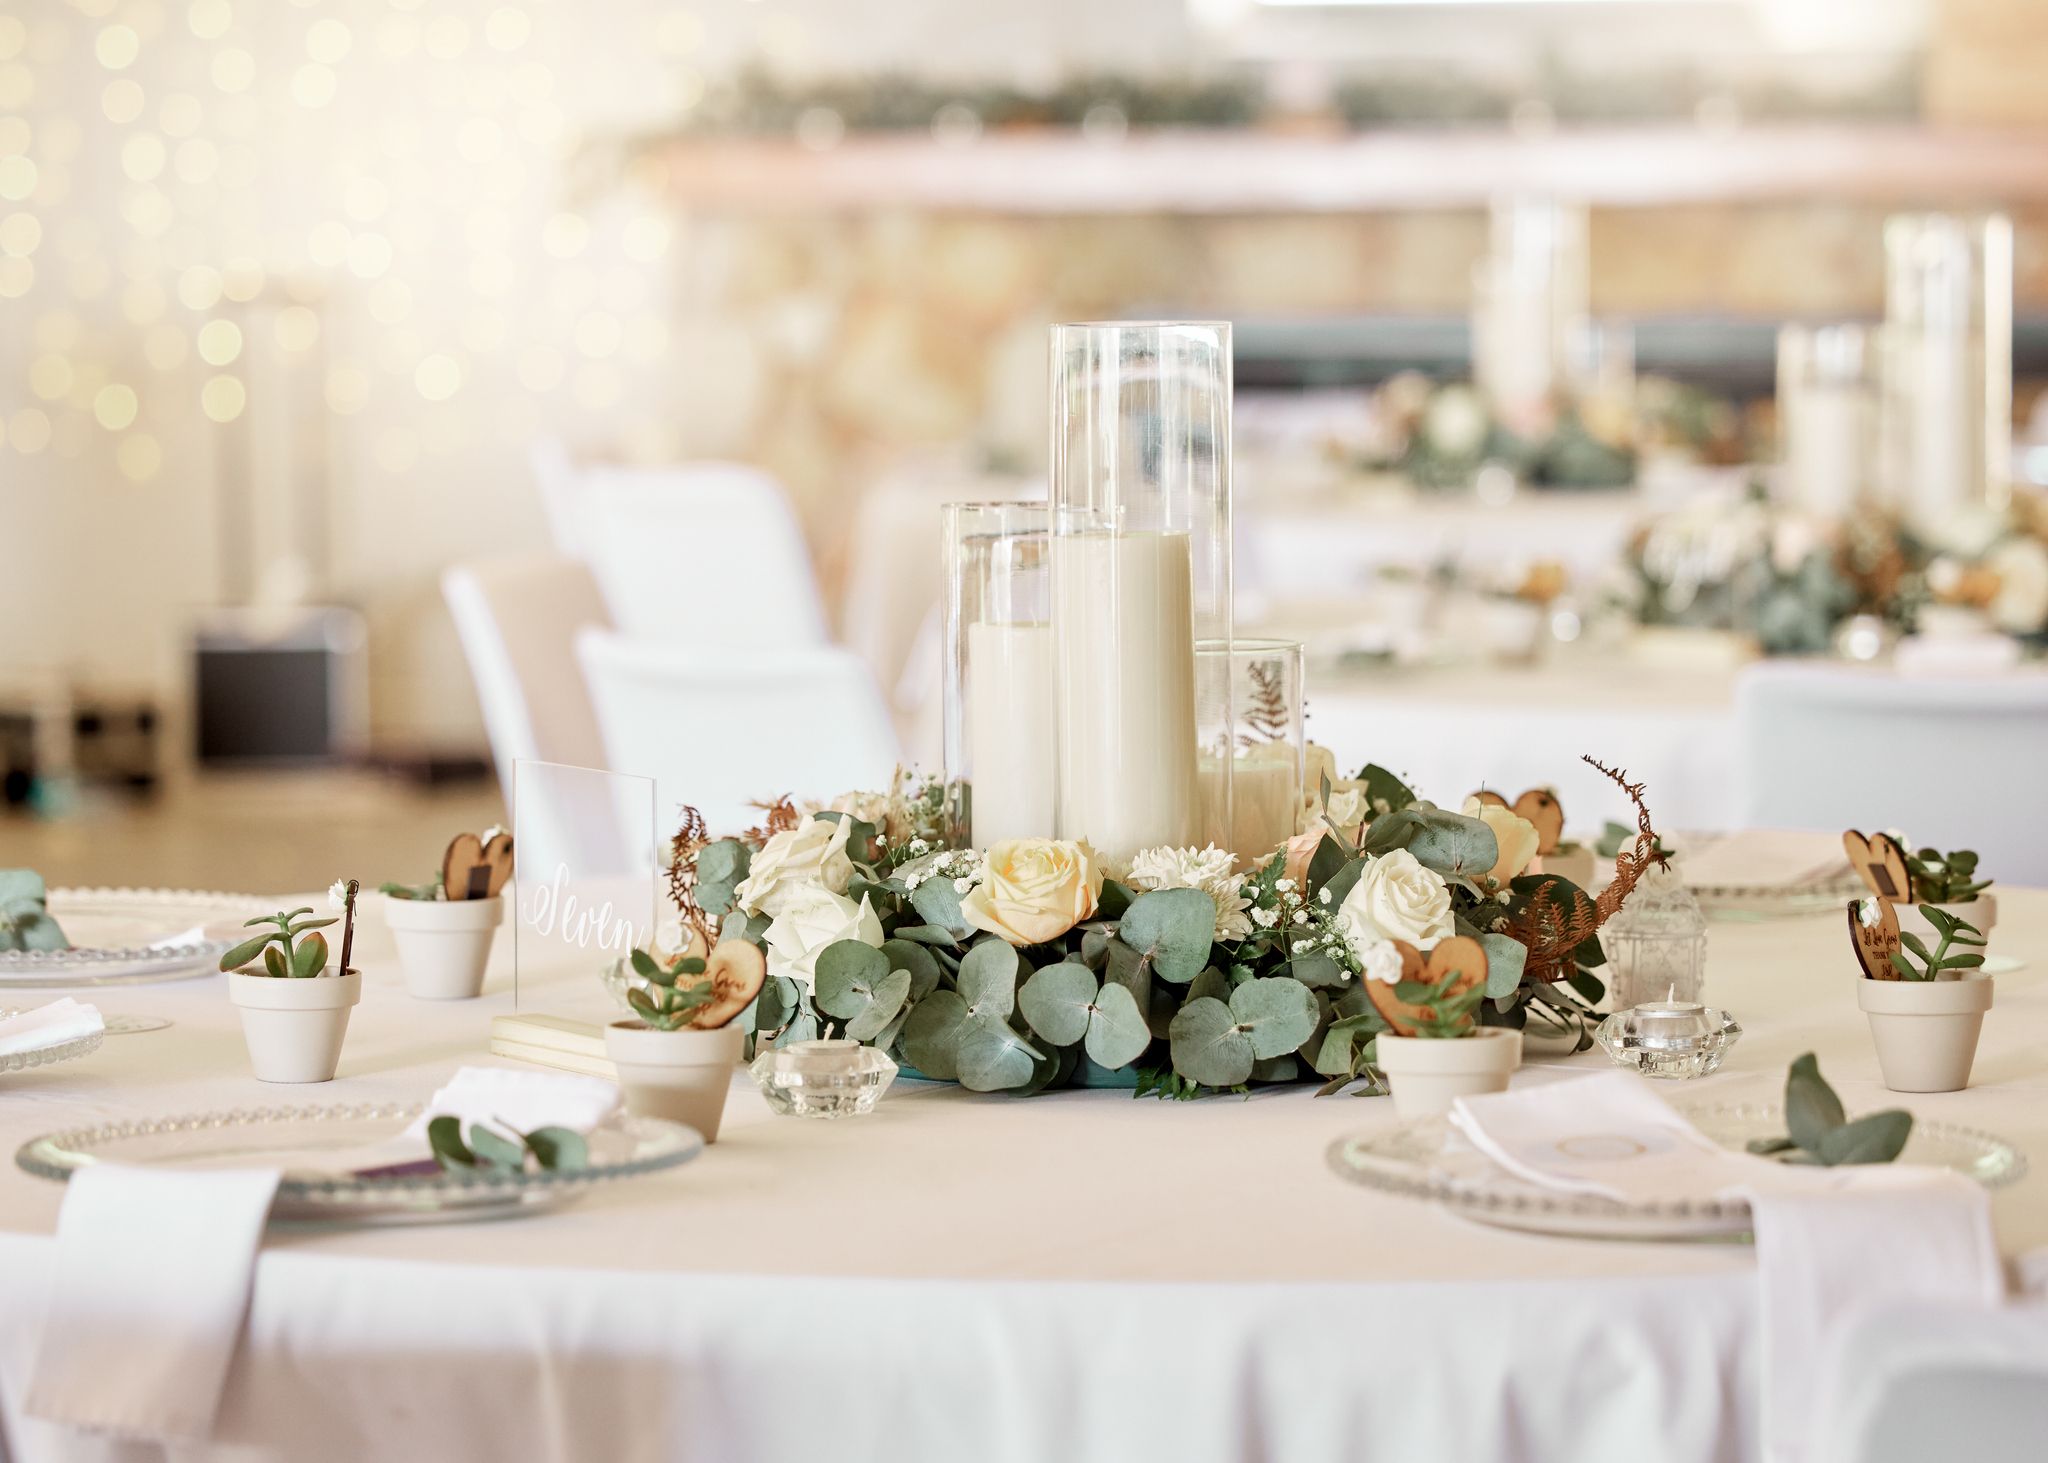 DIY Wedding Décor Items: Budget Friendly and Chic